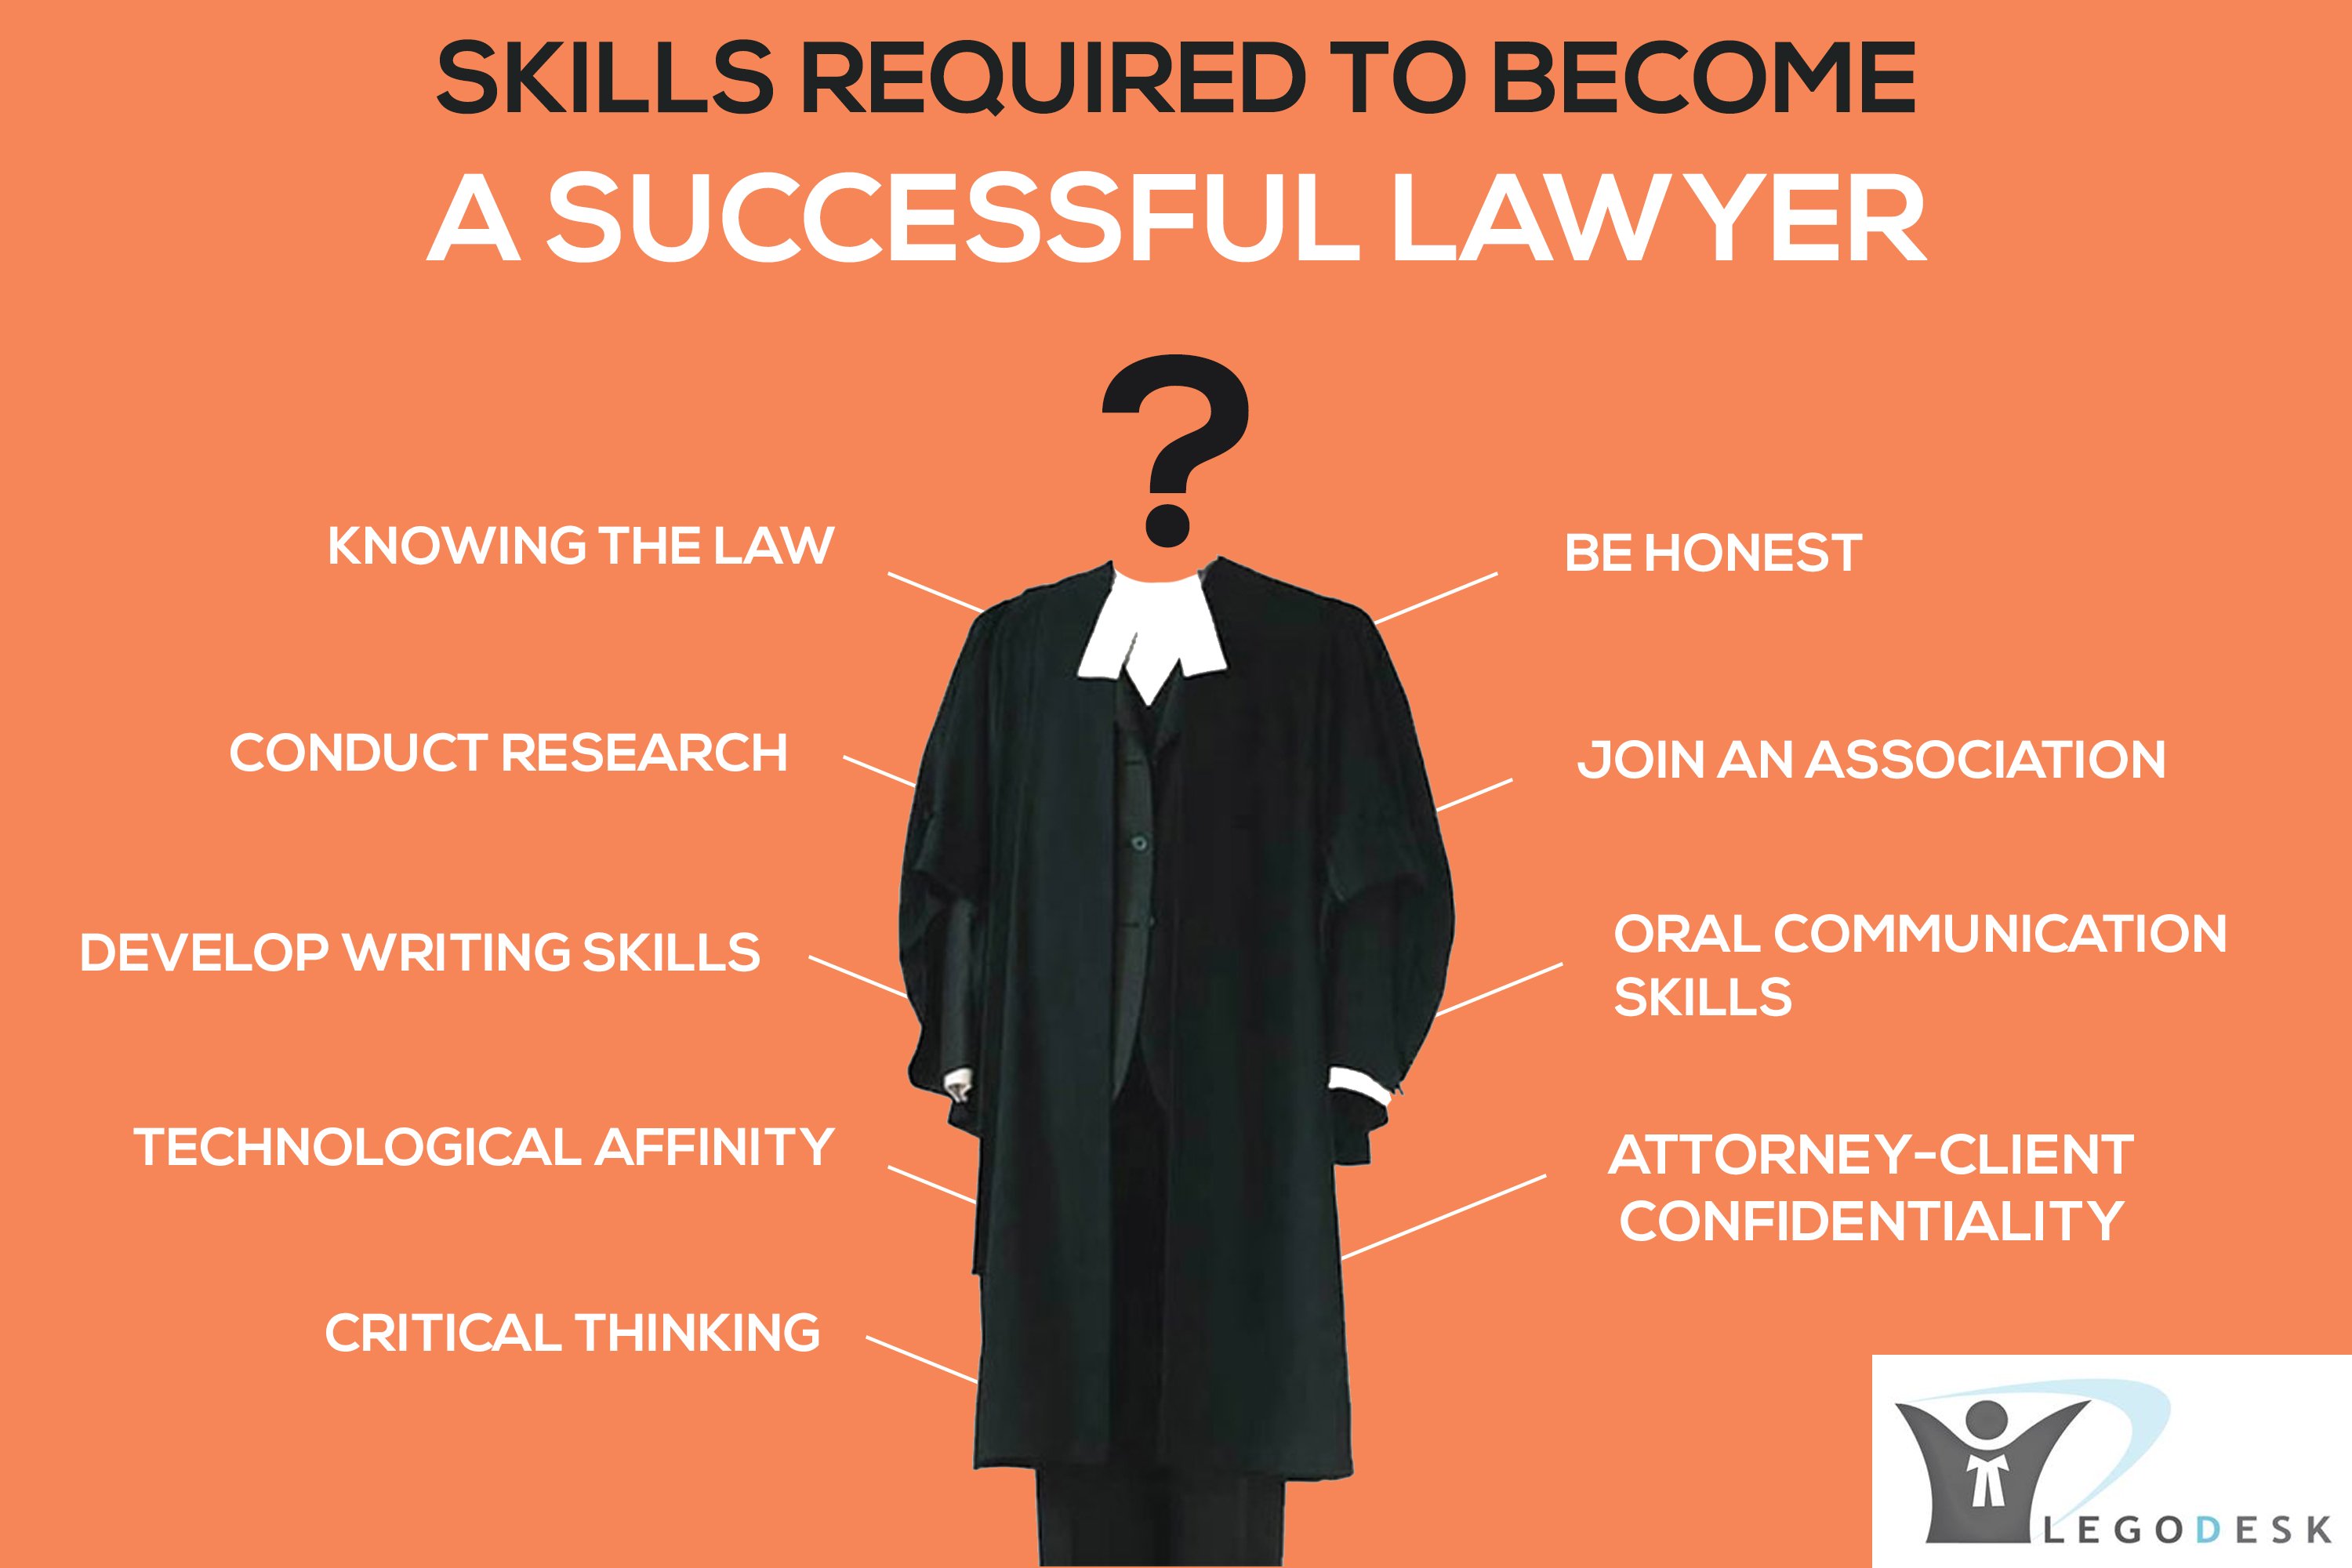 Skills Required to Become a Successful Lawyer